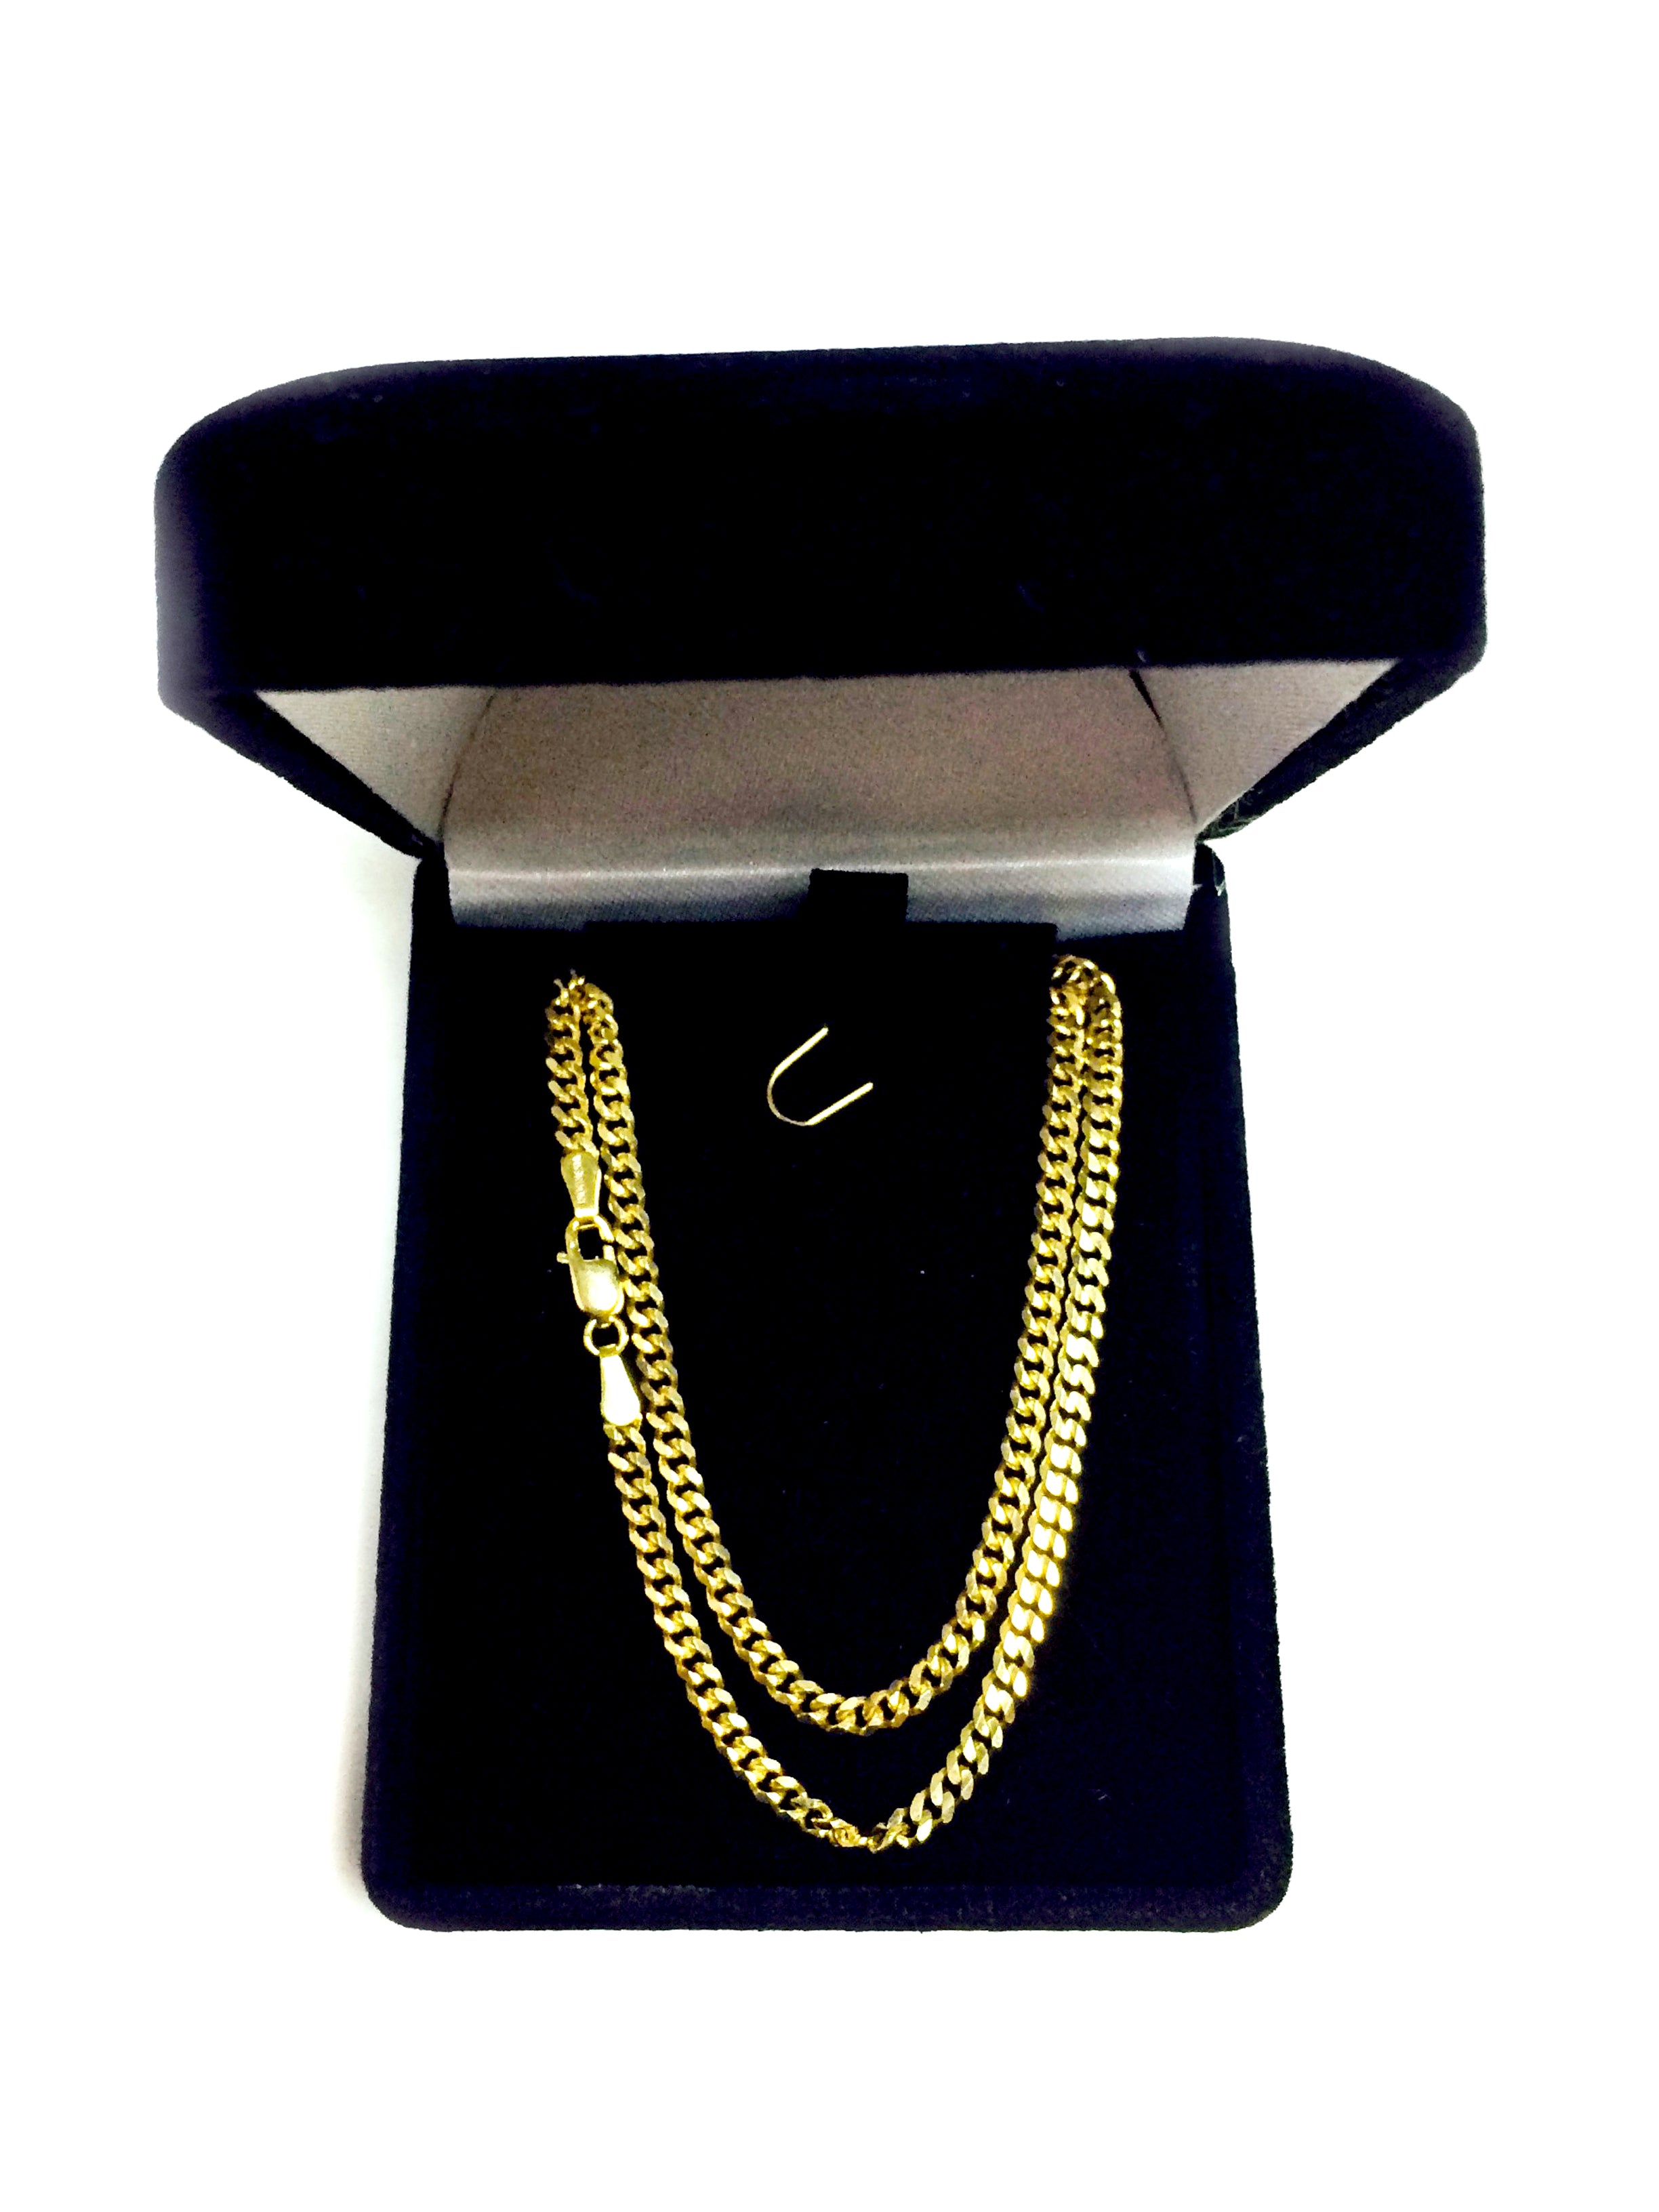 14k Yellow Gold Gourmette Chain Necklace, 3.0mm fine designer jewelry for men and women